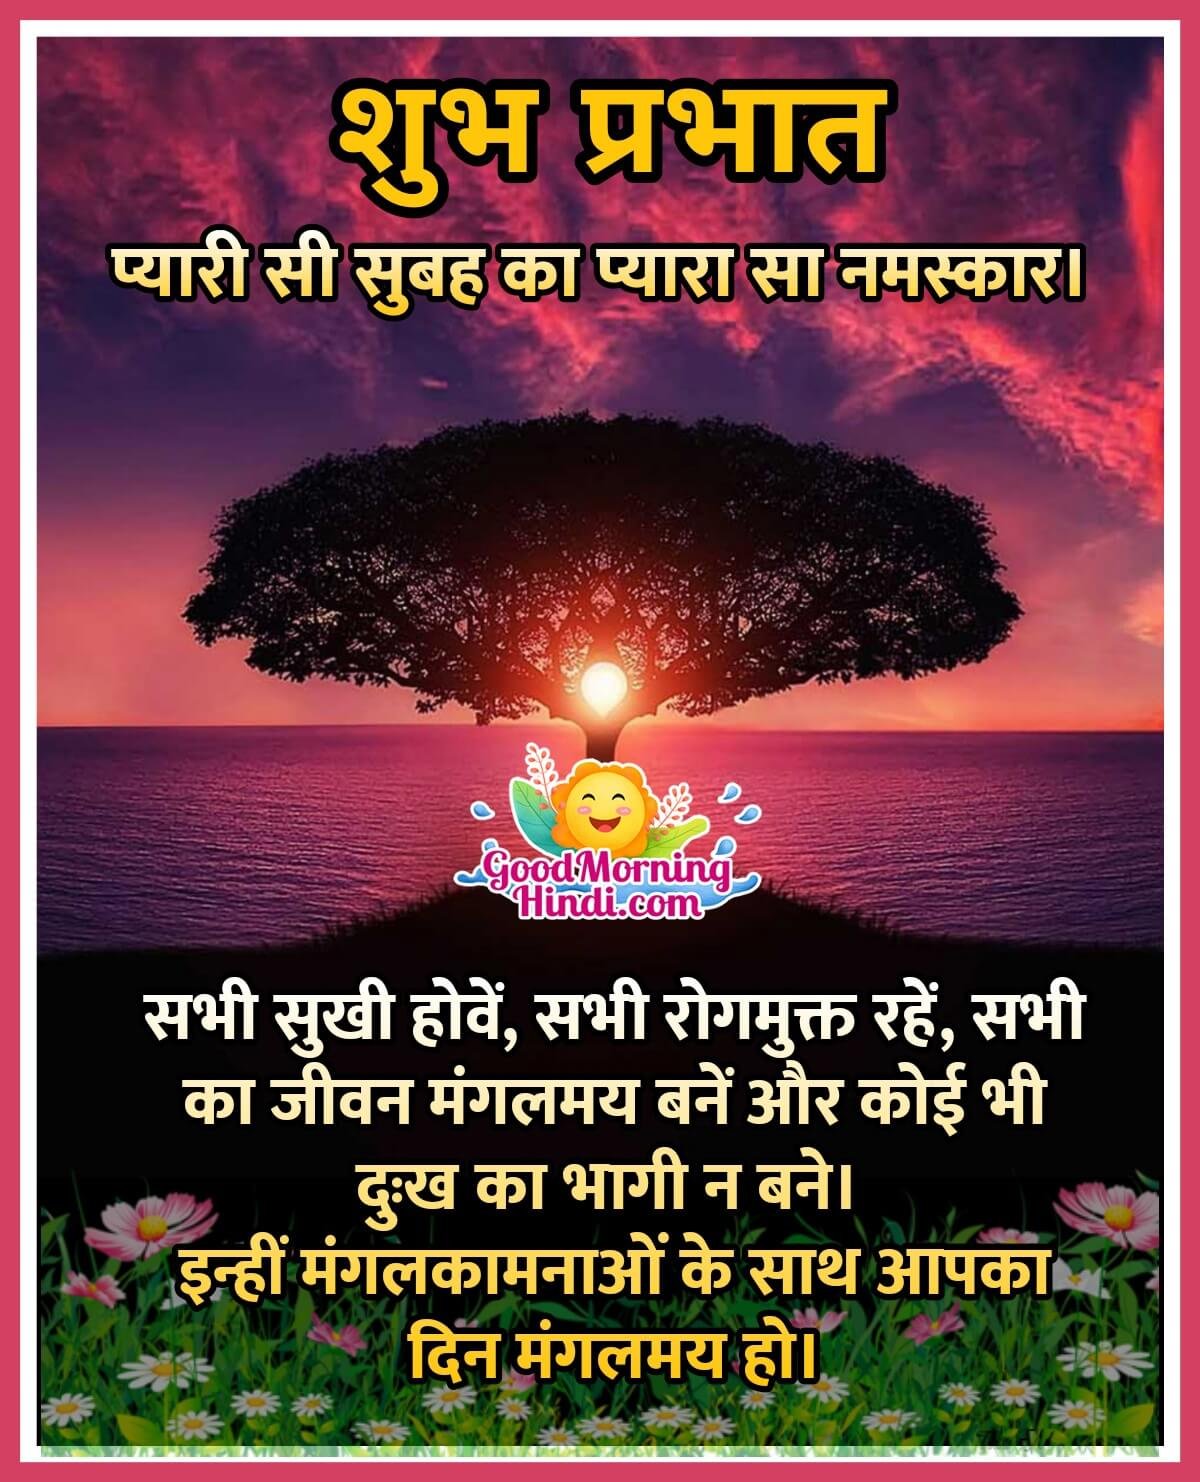 Good Morning Hindi Messages Images - Good Morning Wishes & Images ...